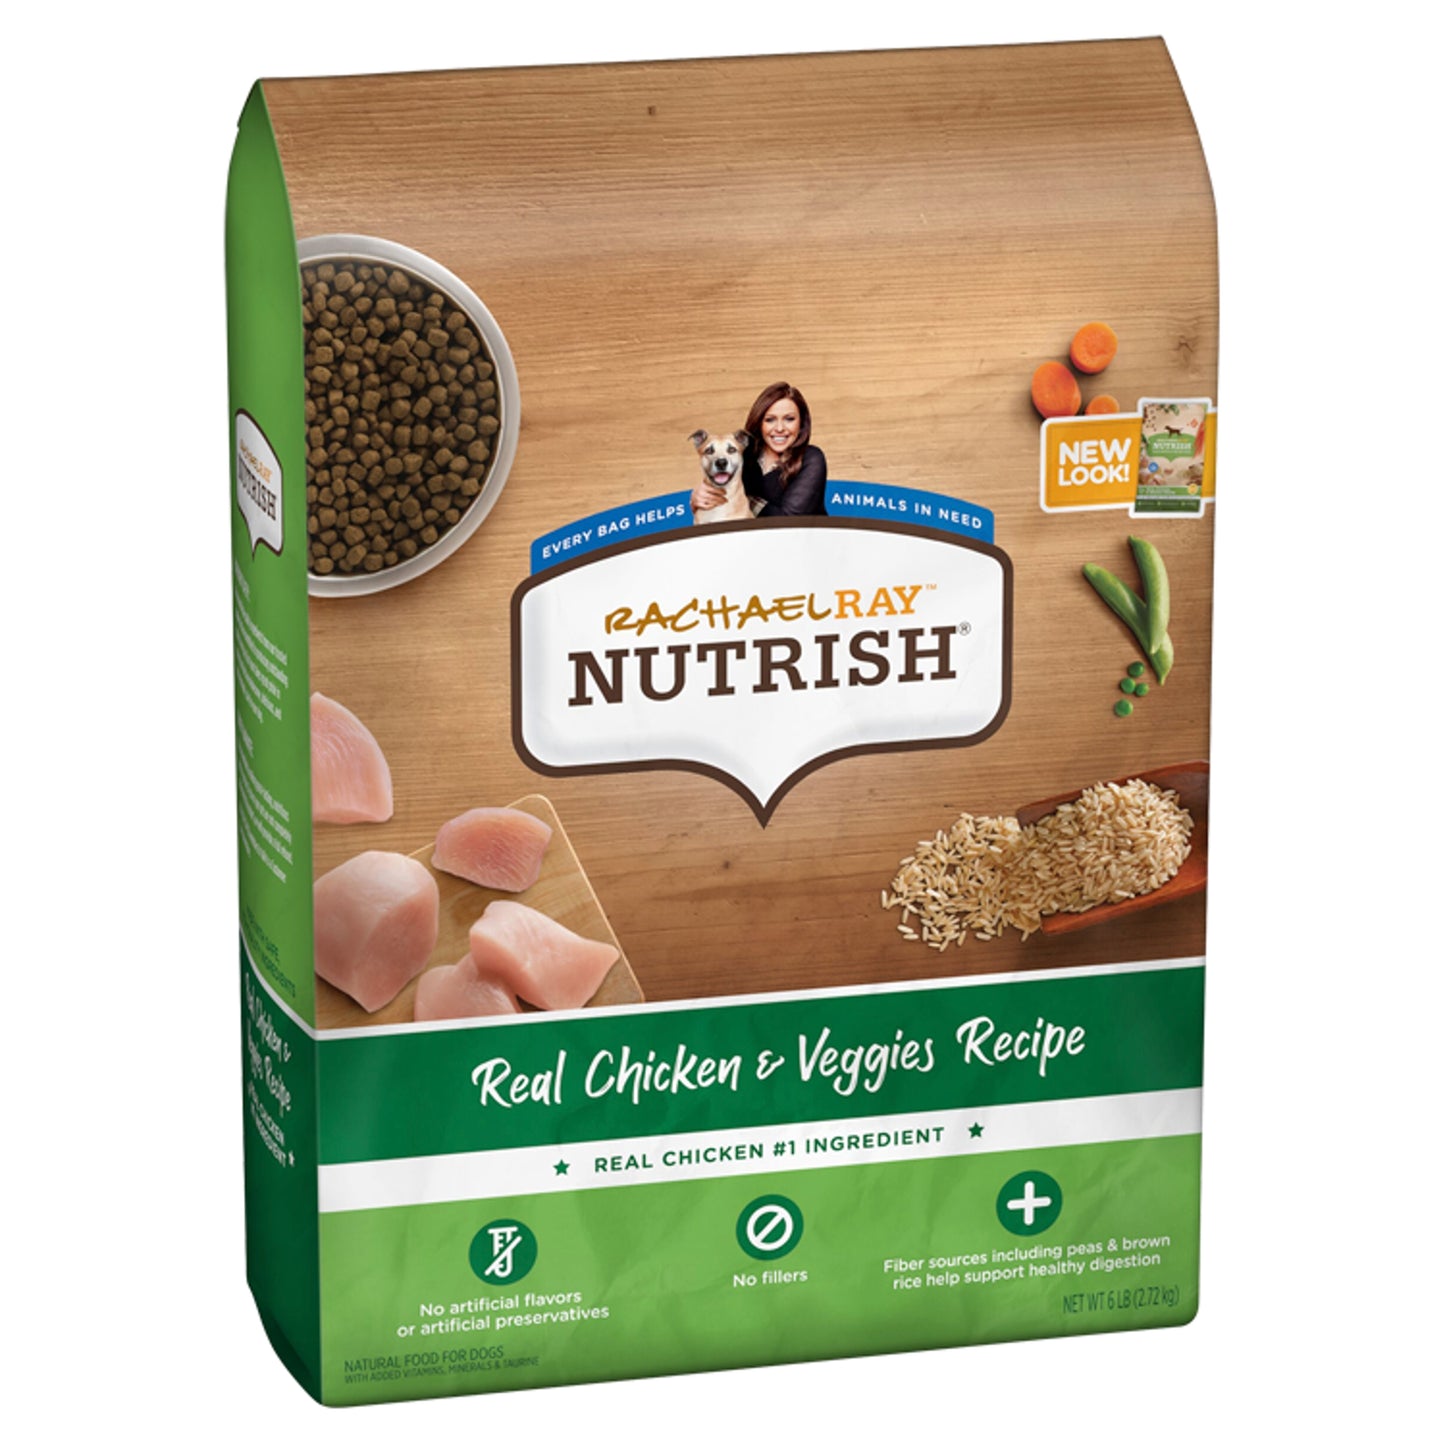 Rachael Ray Nutrish Real Chicken & Veggies Recipe Natural Food for Dogs, 6 Lb